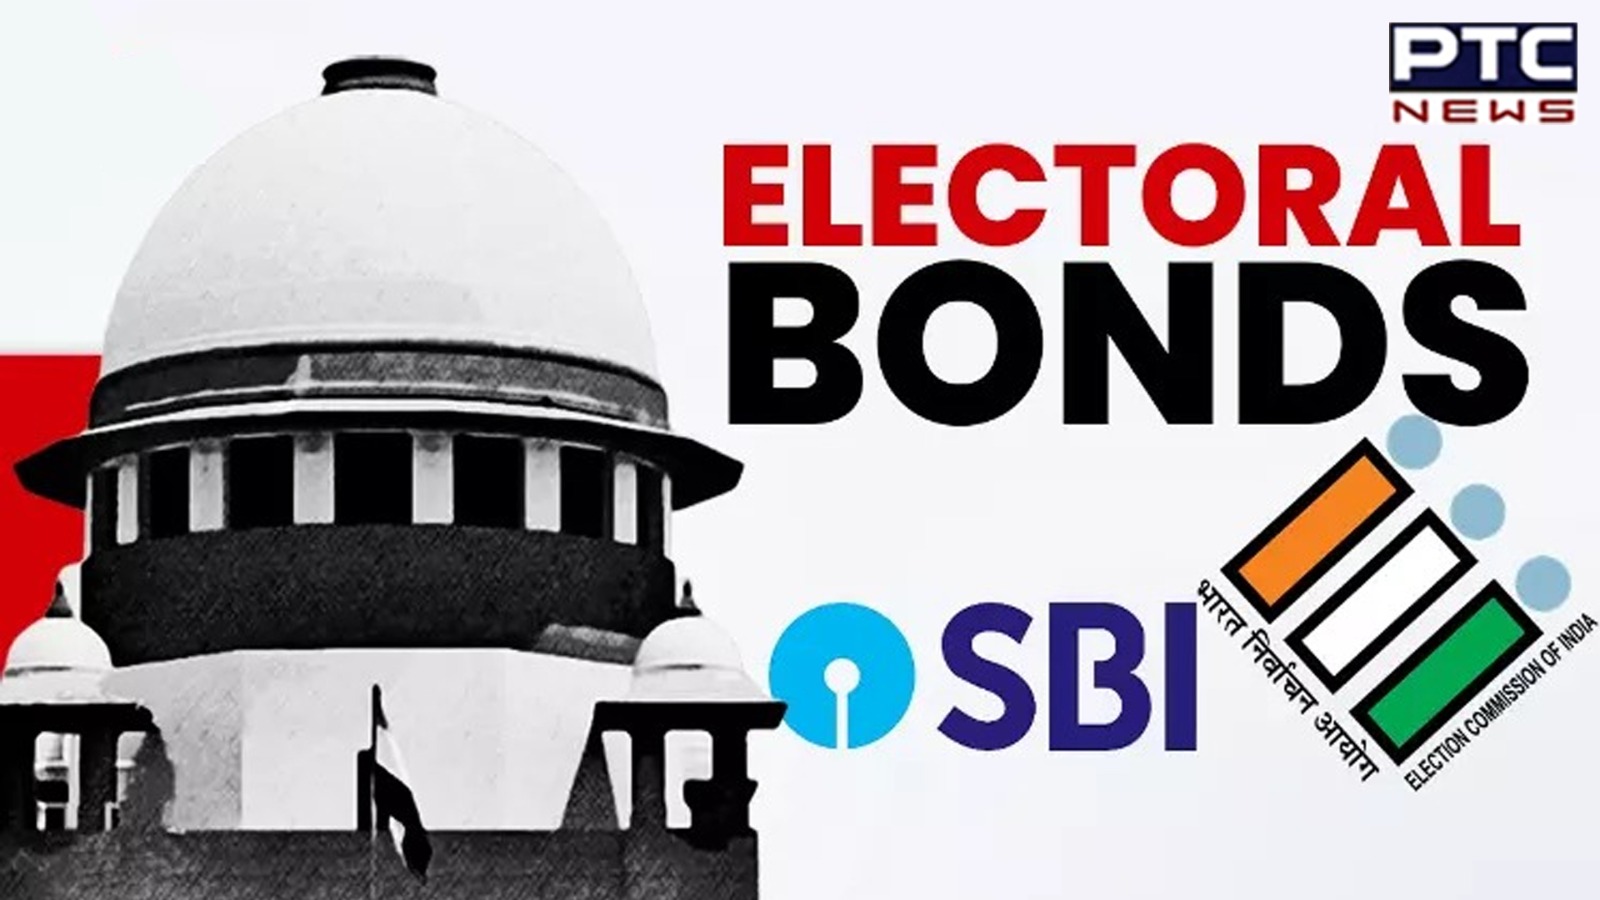 Electoral Bonds Case: SBI submits all details of Electoral Bonds with alphanumeric numbers to EC